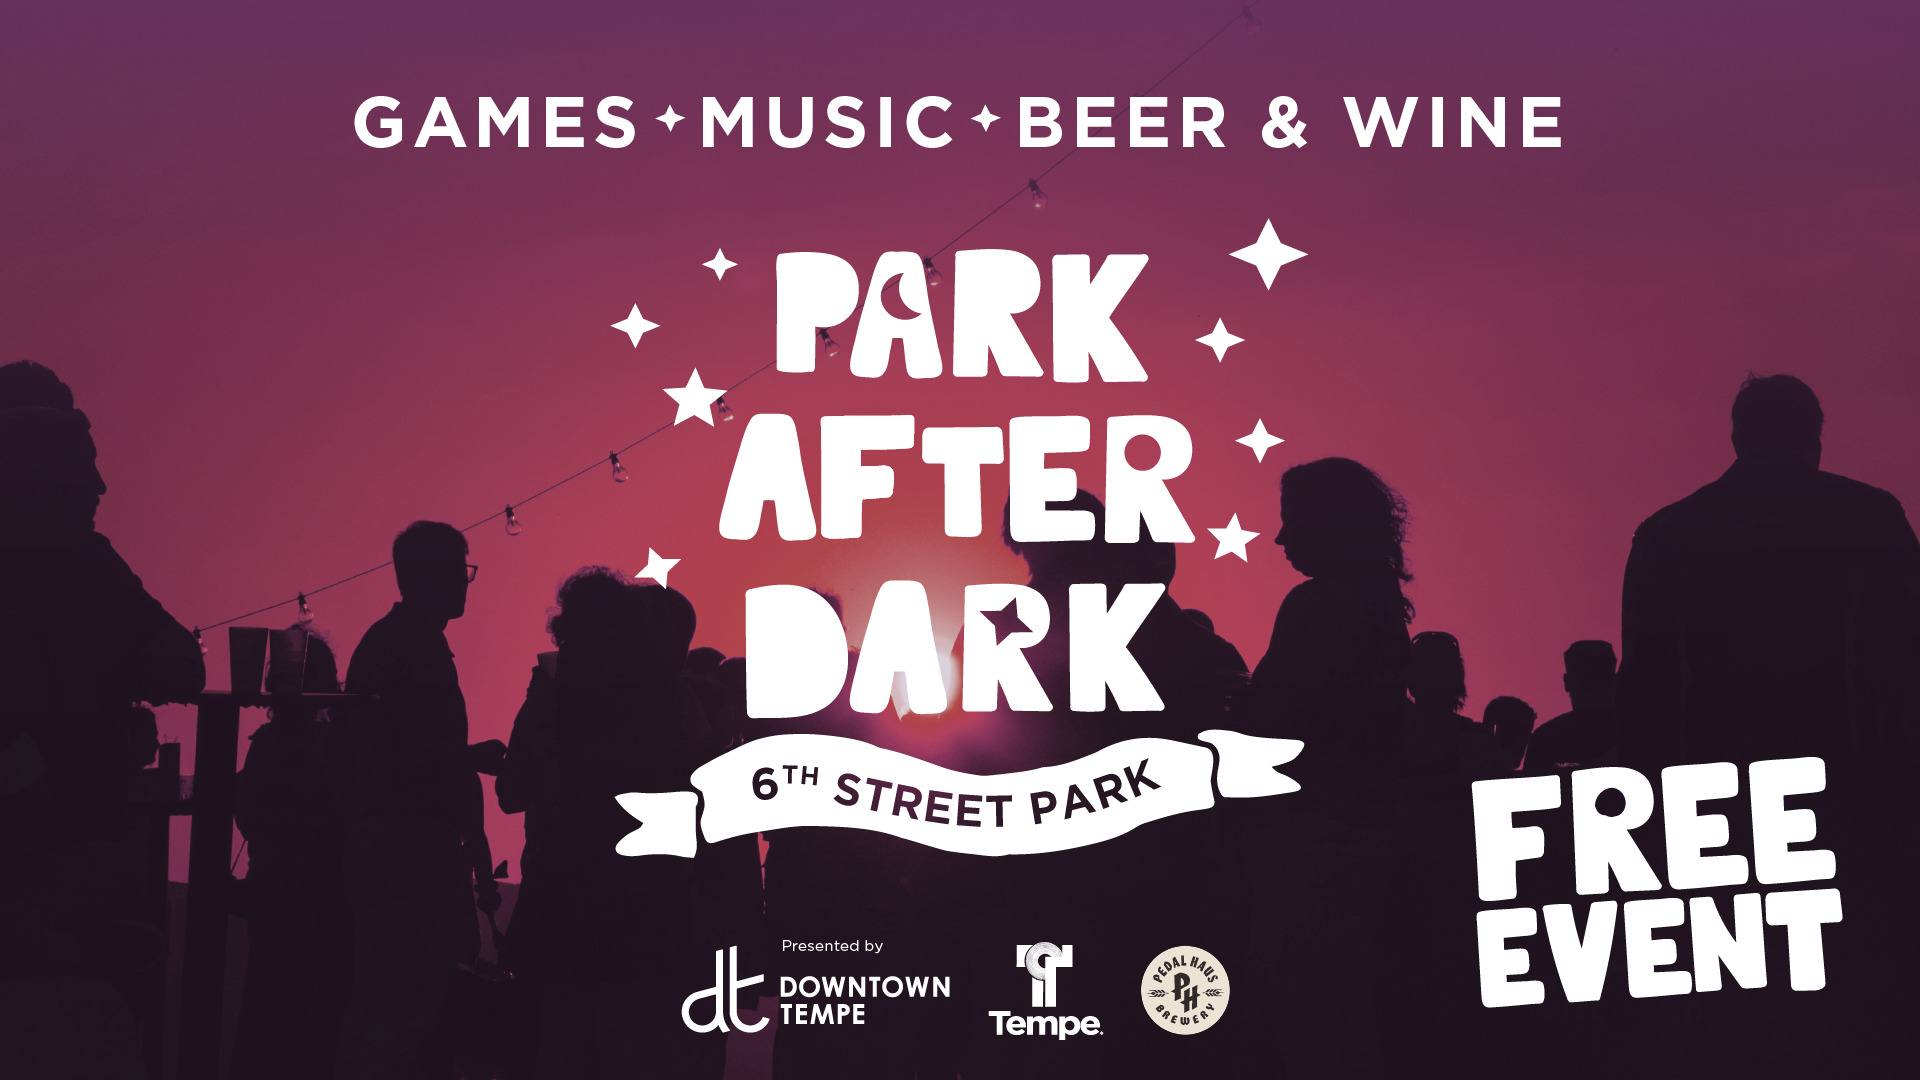 Head to Downtown Tempe after dark for live music, activities, and good times for the entire family to enjoy. 